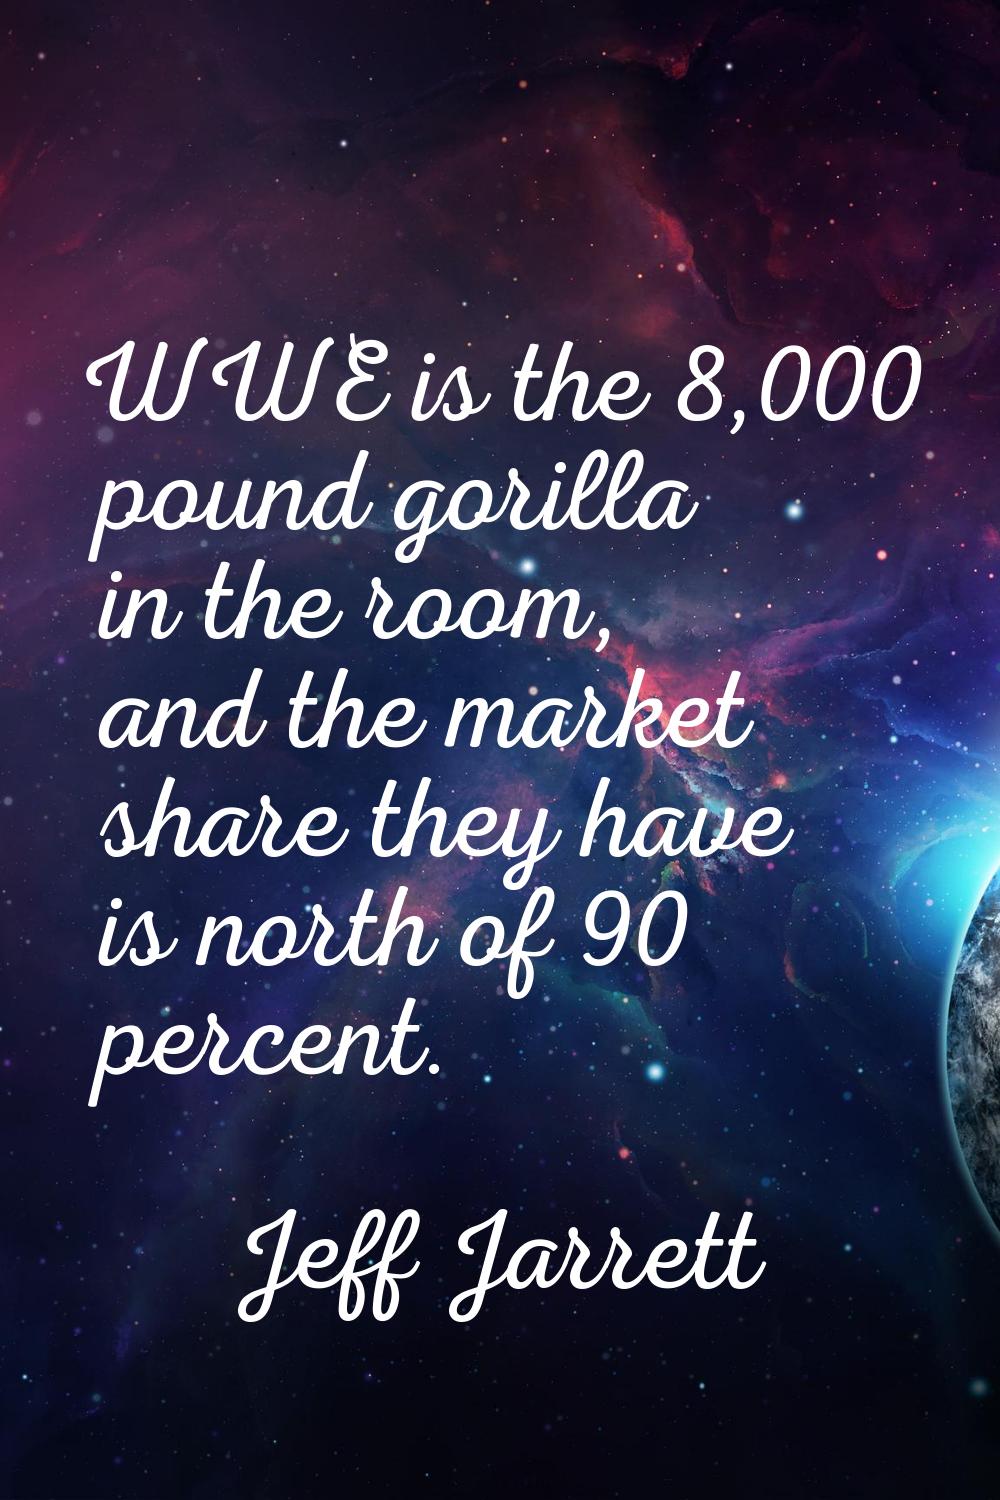 WWE is the 8,000 pound gorilla in the room, and the market share they have is north of 90 percent.